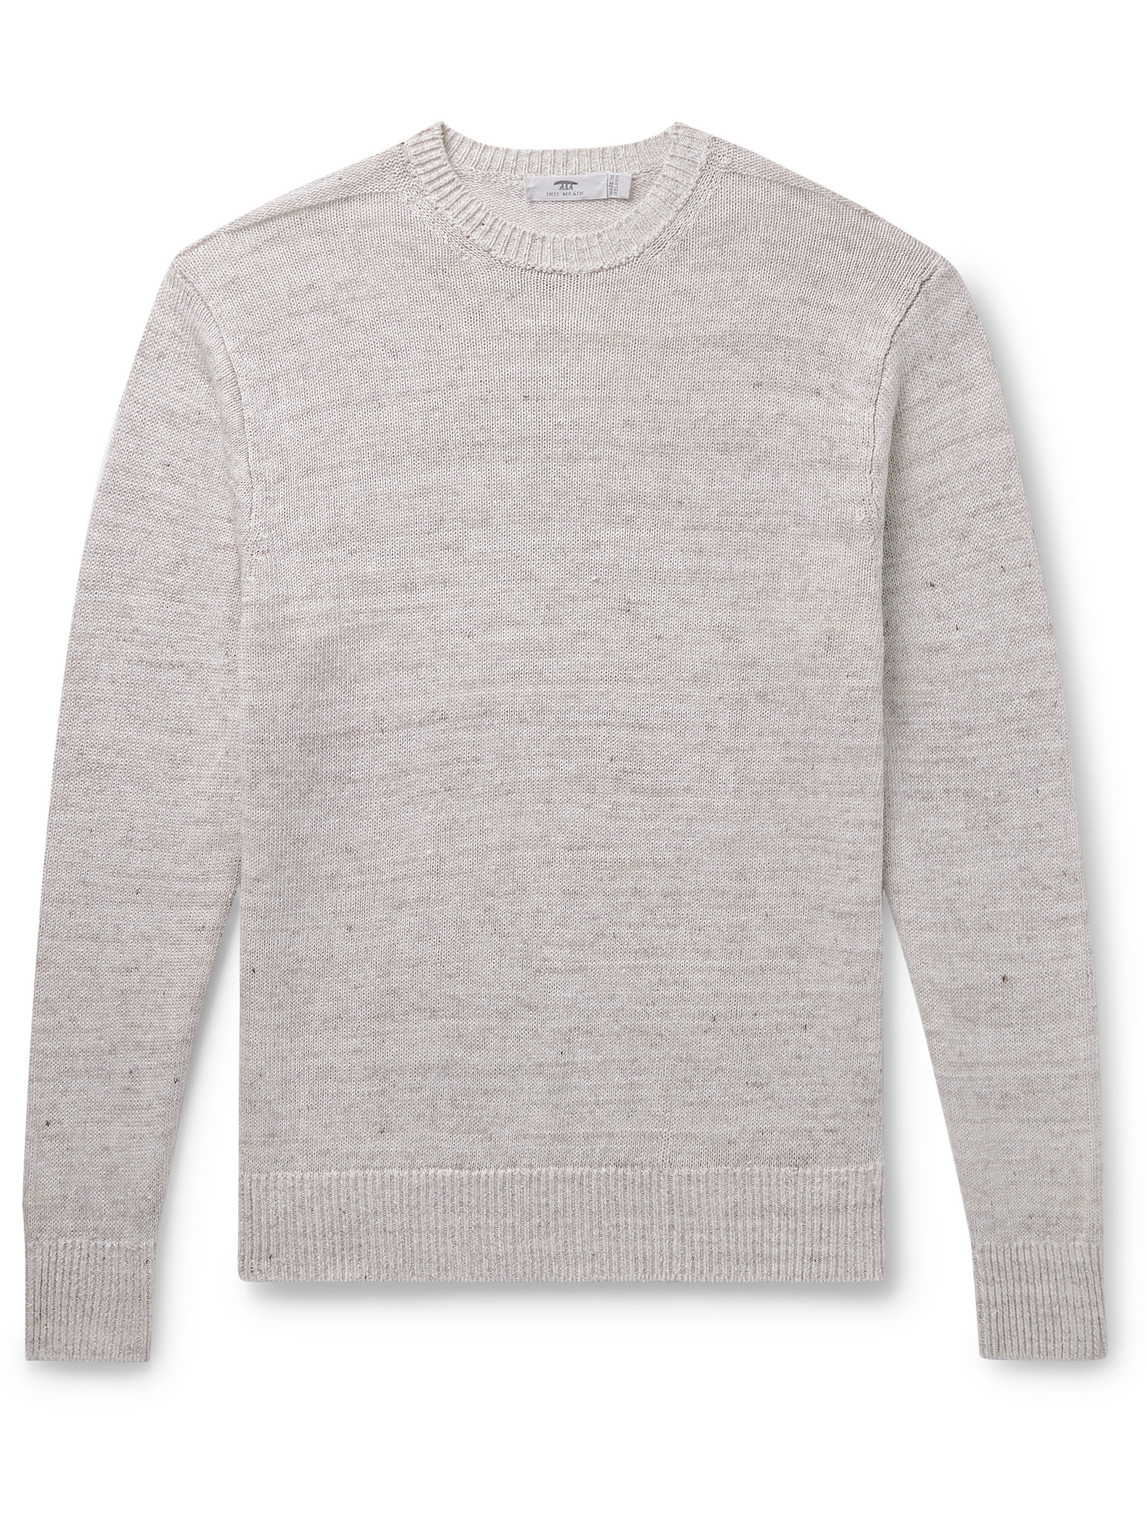 Inis Meain Linen Sweater In Gray